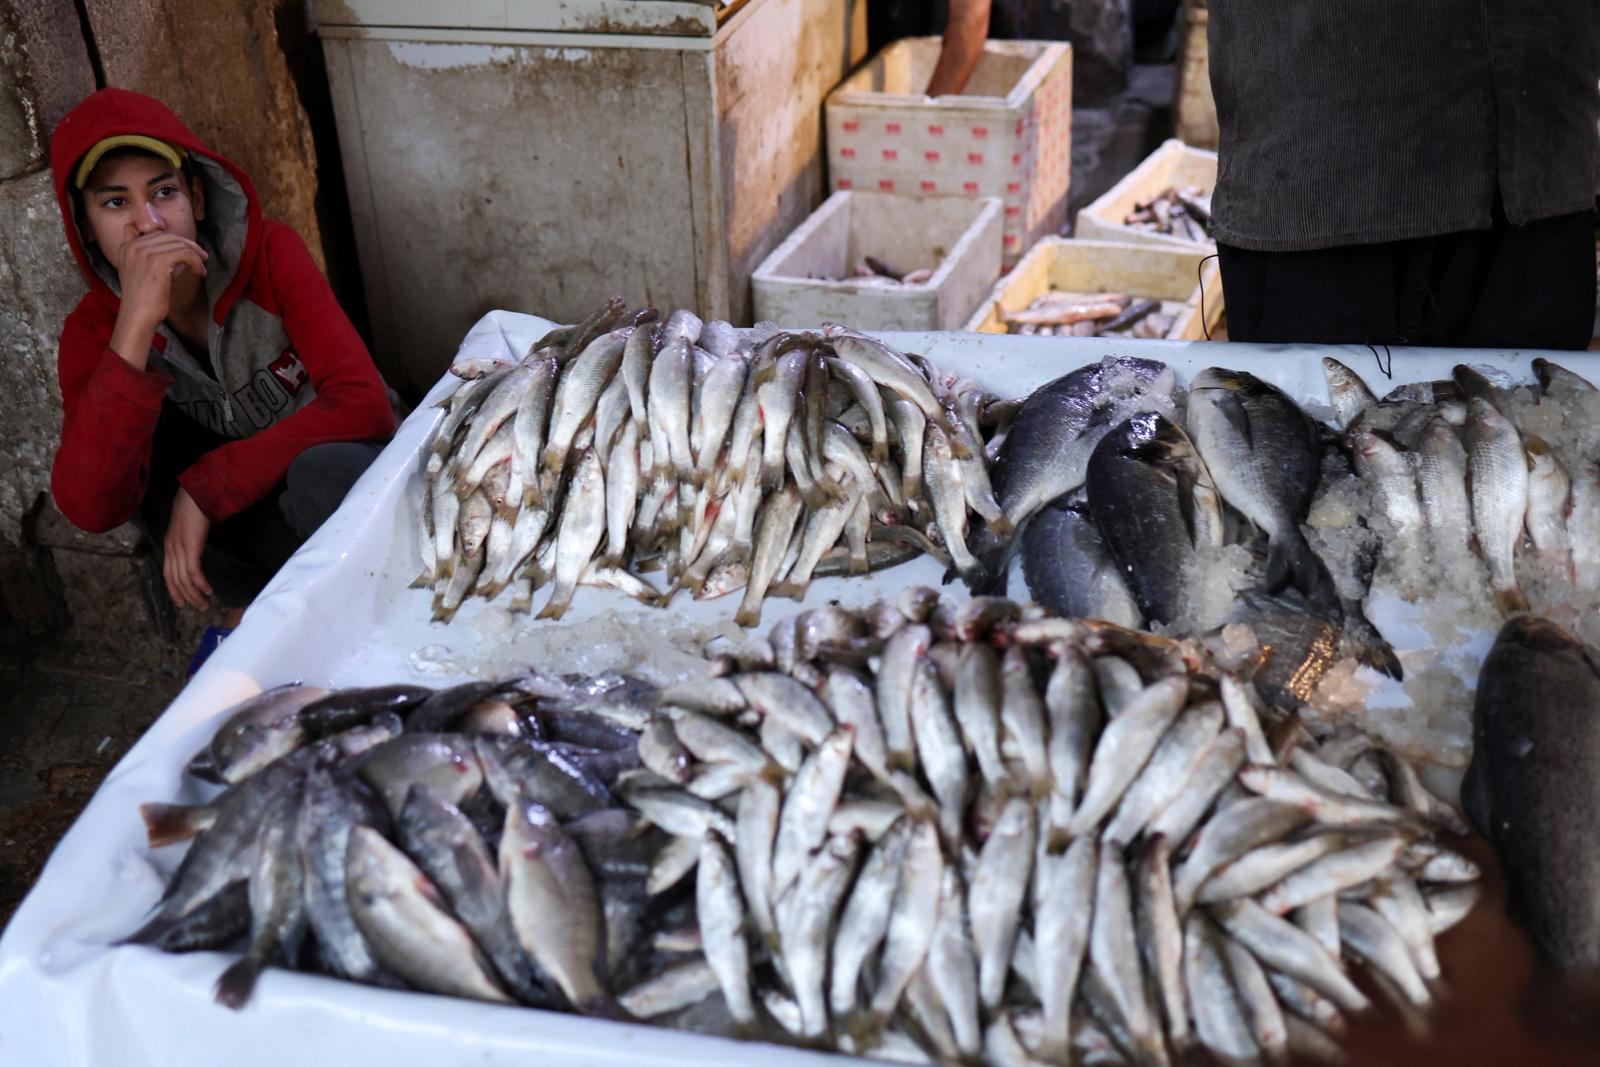 An Iraqi vendor shows different kinds of fish to customers at fish market at in Najaf, Iraq November 30, 2022.